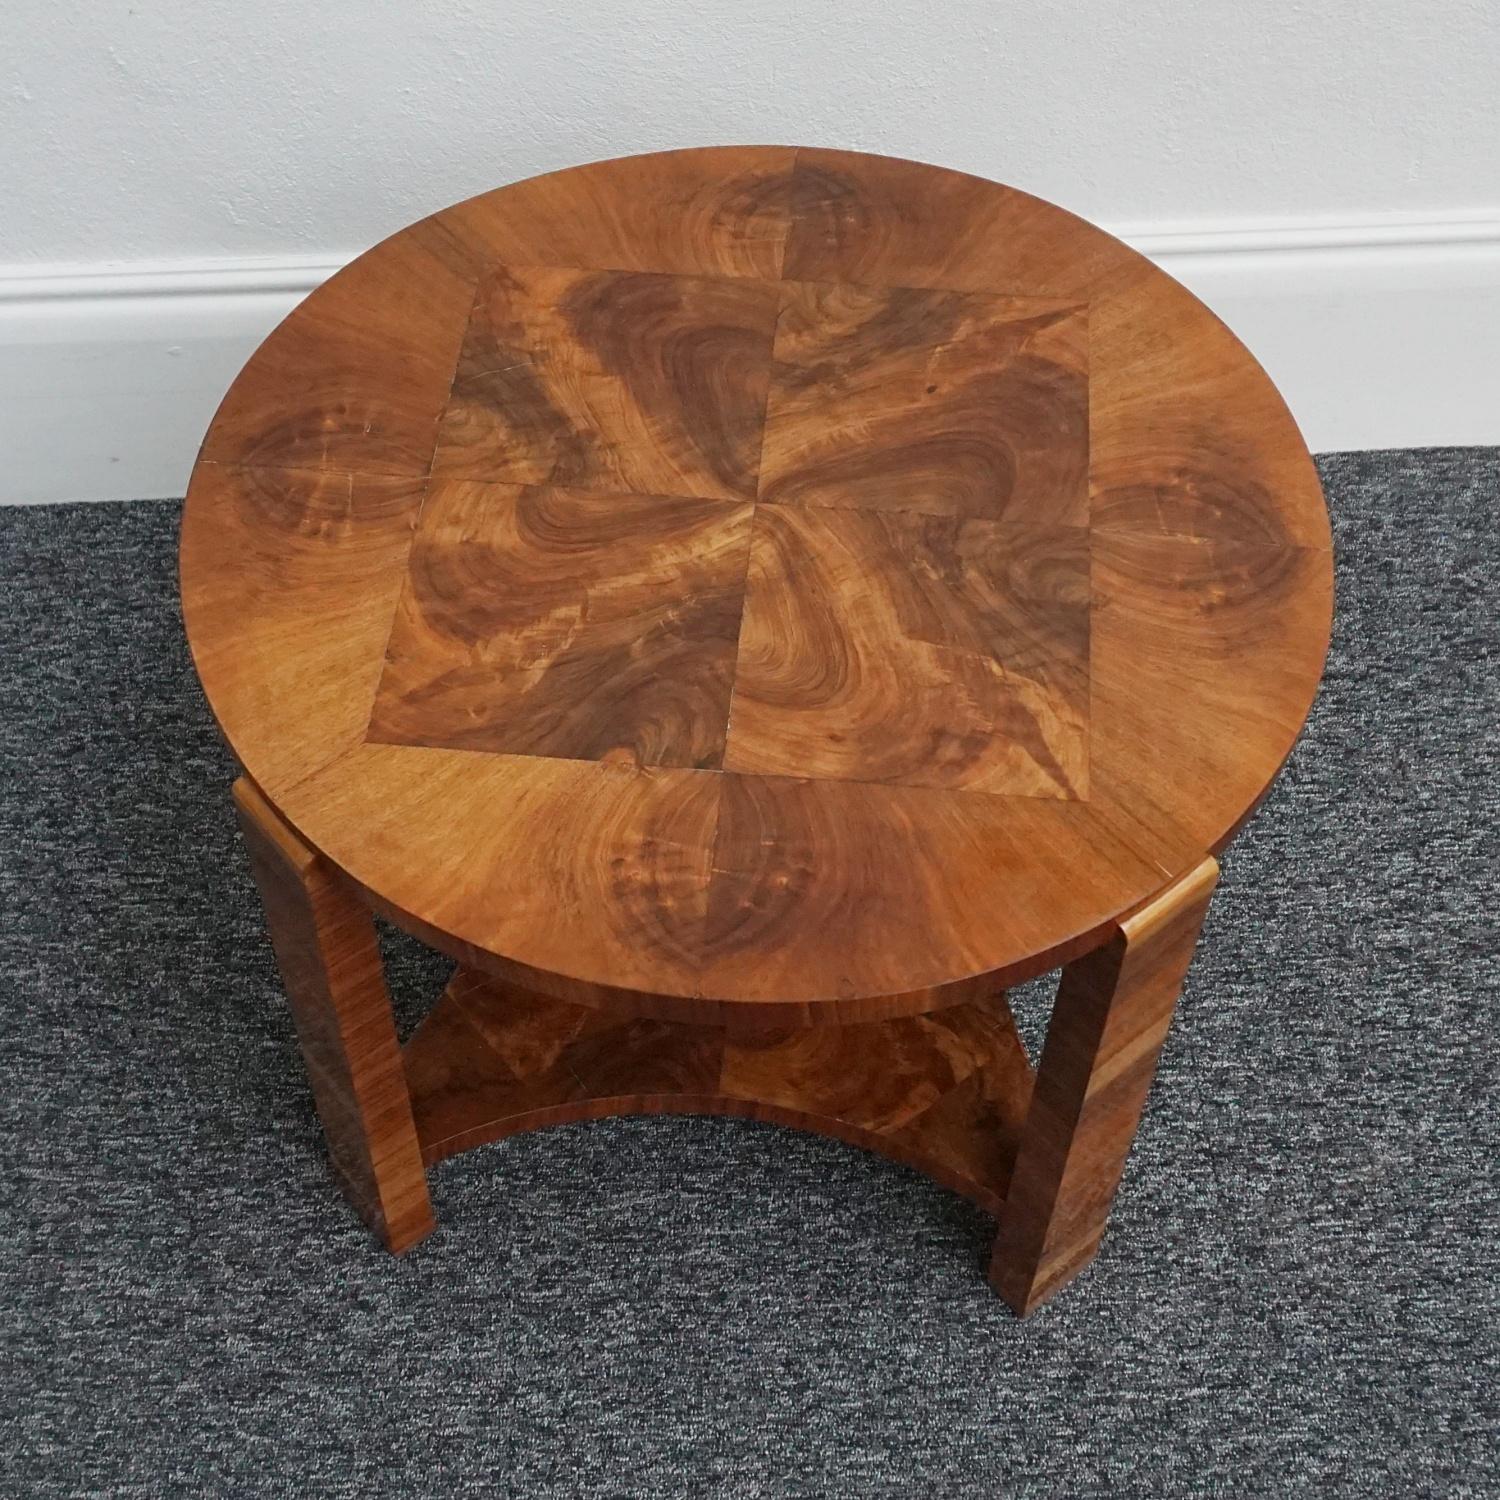 An Art Deco side table. Circular side table with squared burr walnut centre and burr walnut surround. Figured walnut legs and a burr walnut shaped lower shelf. 

Dimensions: H 51cm D 67cm 

Origin: English

Date: Circa 1935 

Item Number: